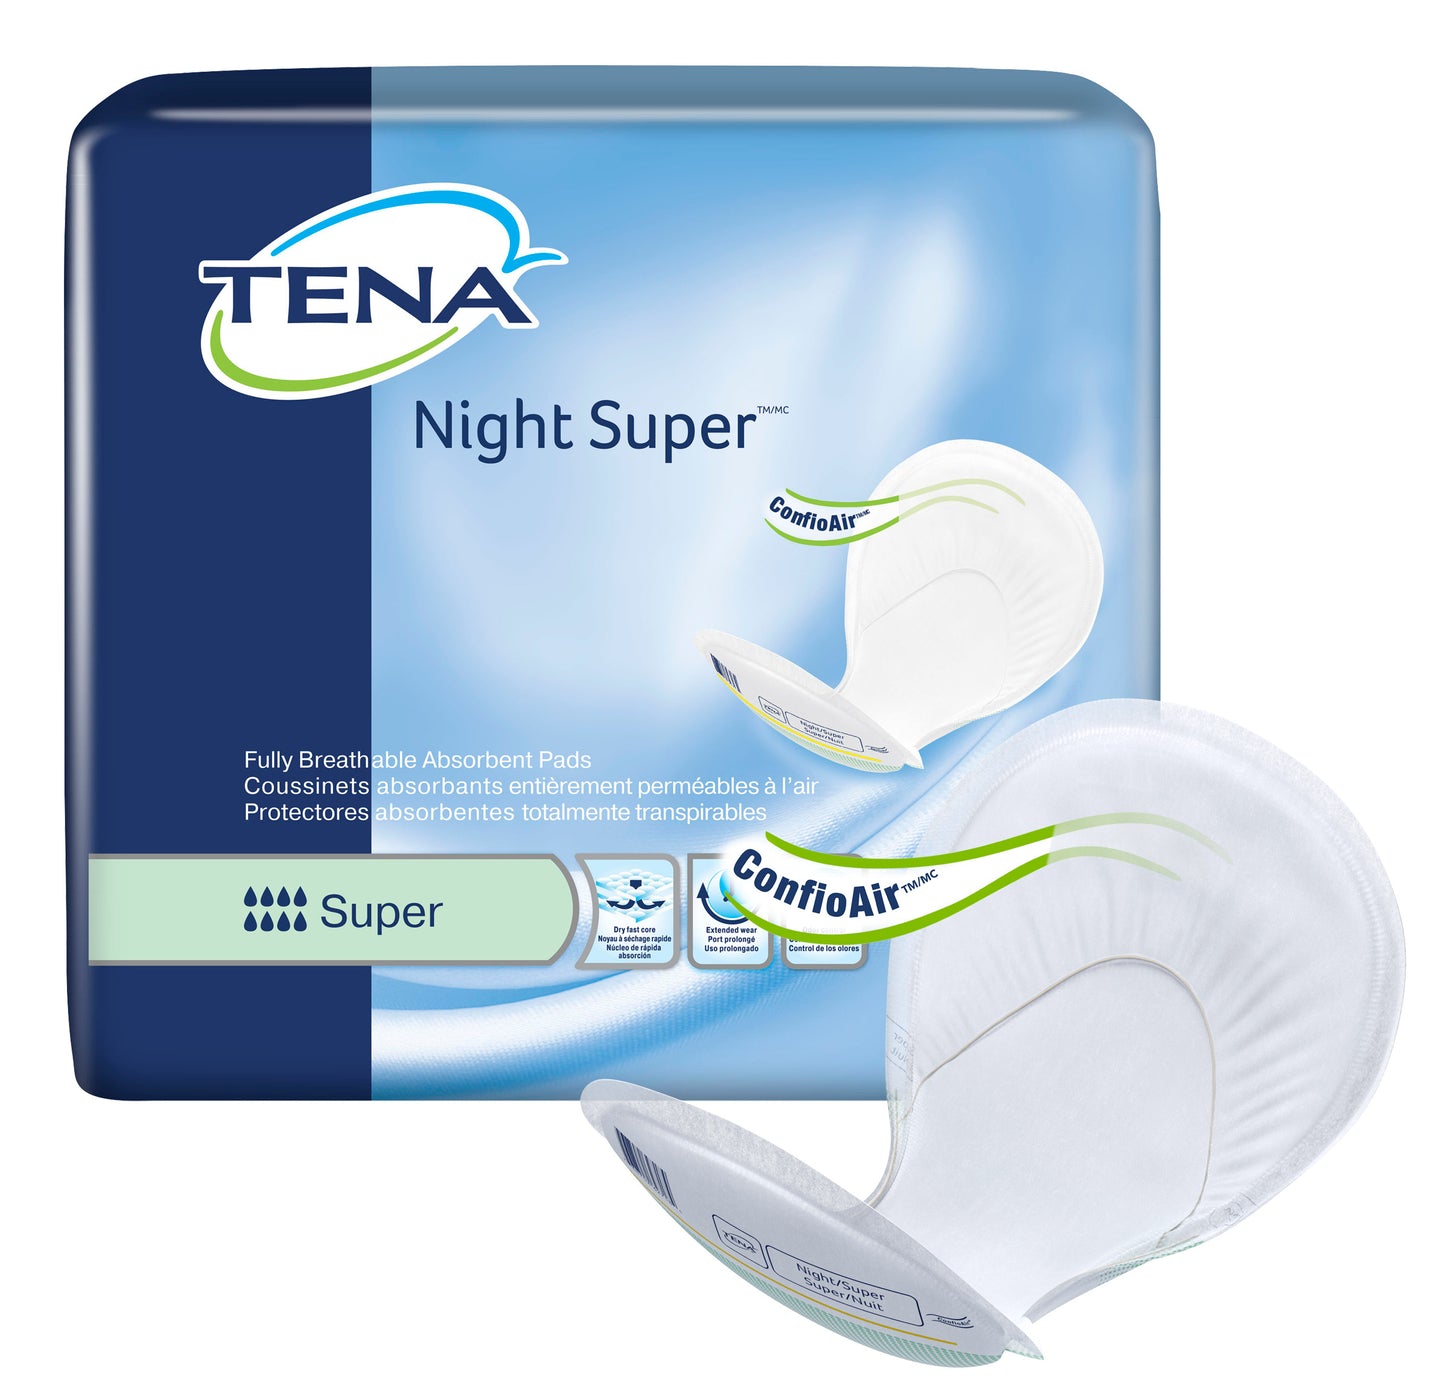 TENA ProSkin Night Super, Fully Breathable Large Absorbent Pads